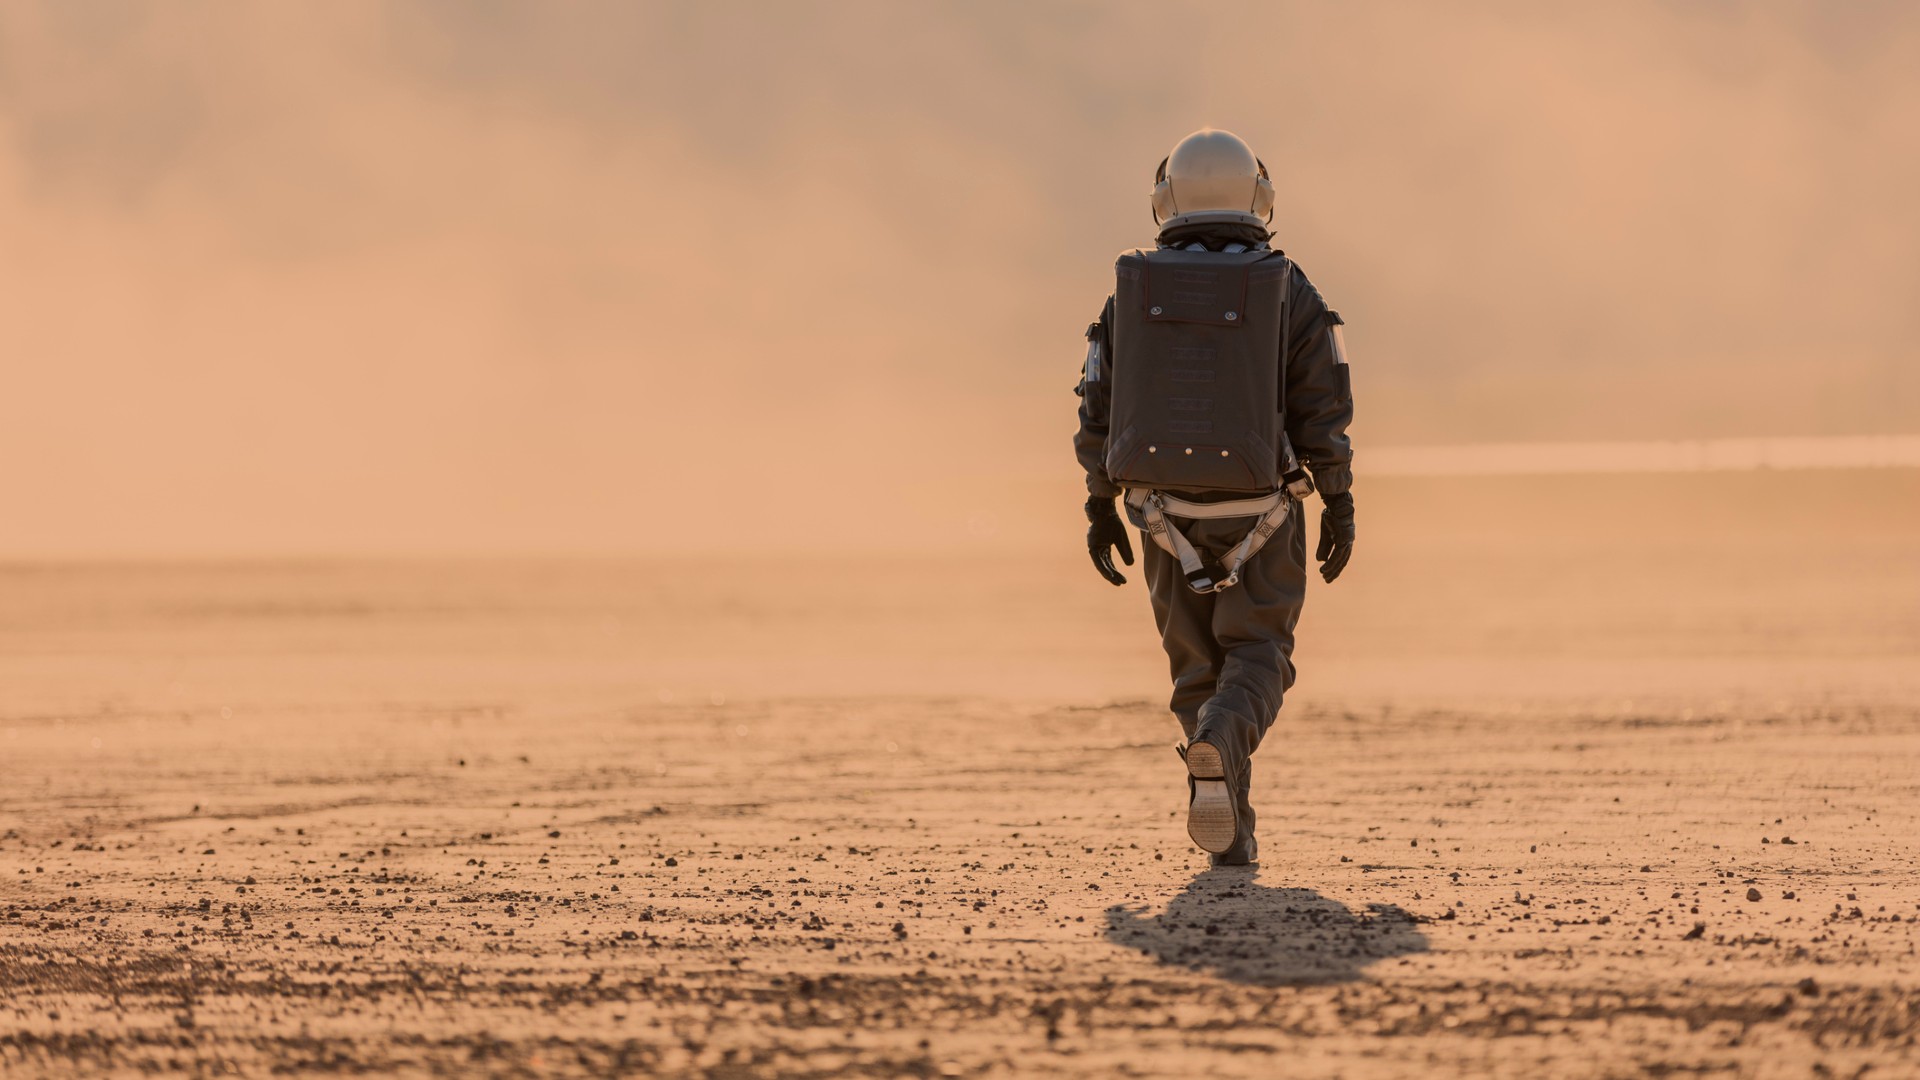 How long would it take to walk around Mars? Space